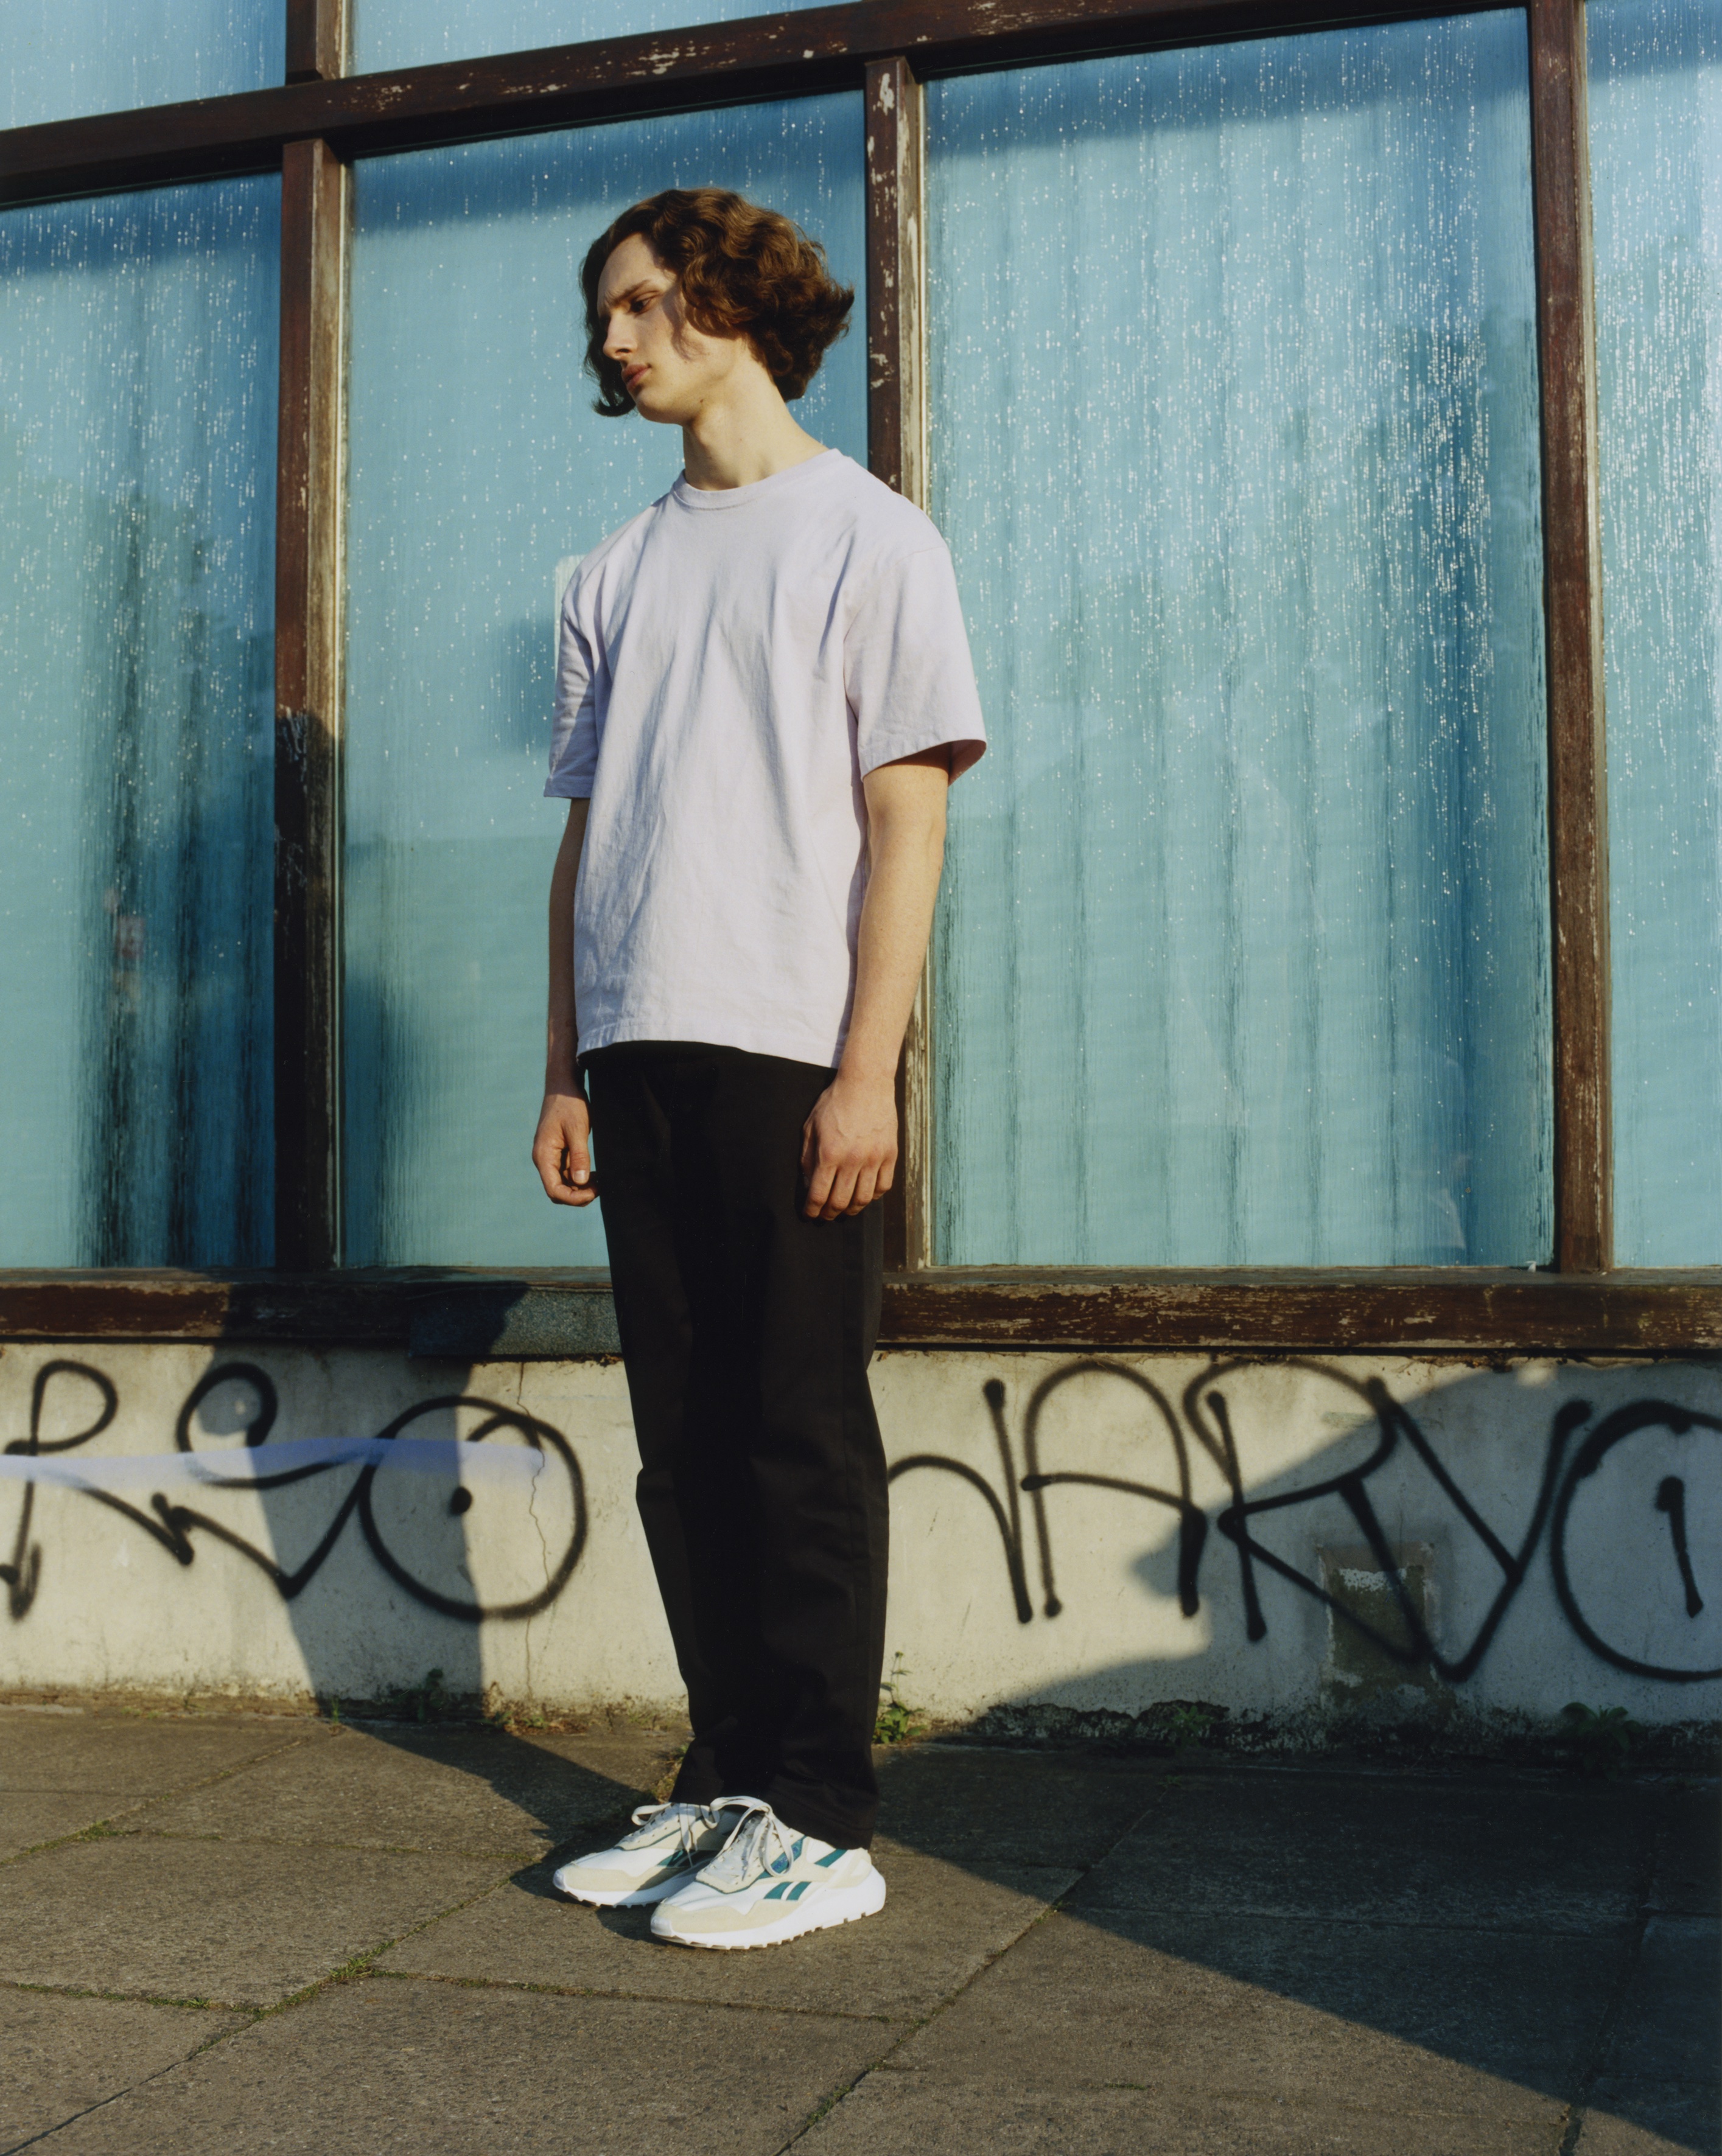 Laurie stands on the pavement next to windows. They wear white reeboks with blue detailing. Back trousers and a white t-shirt.